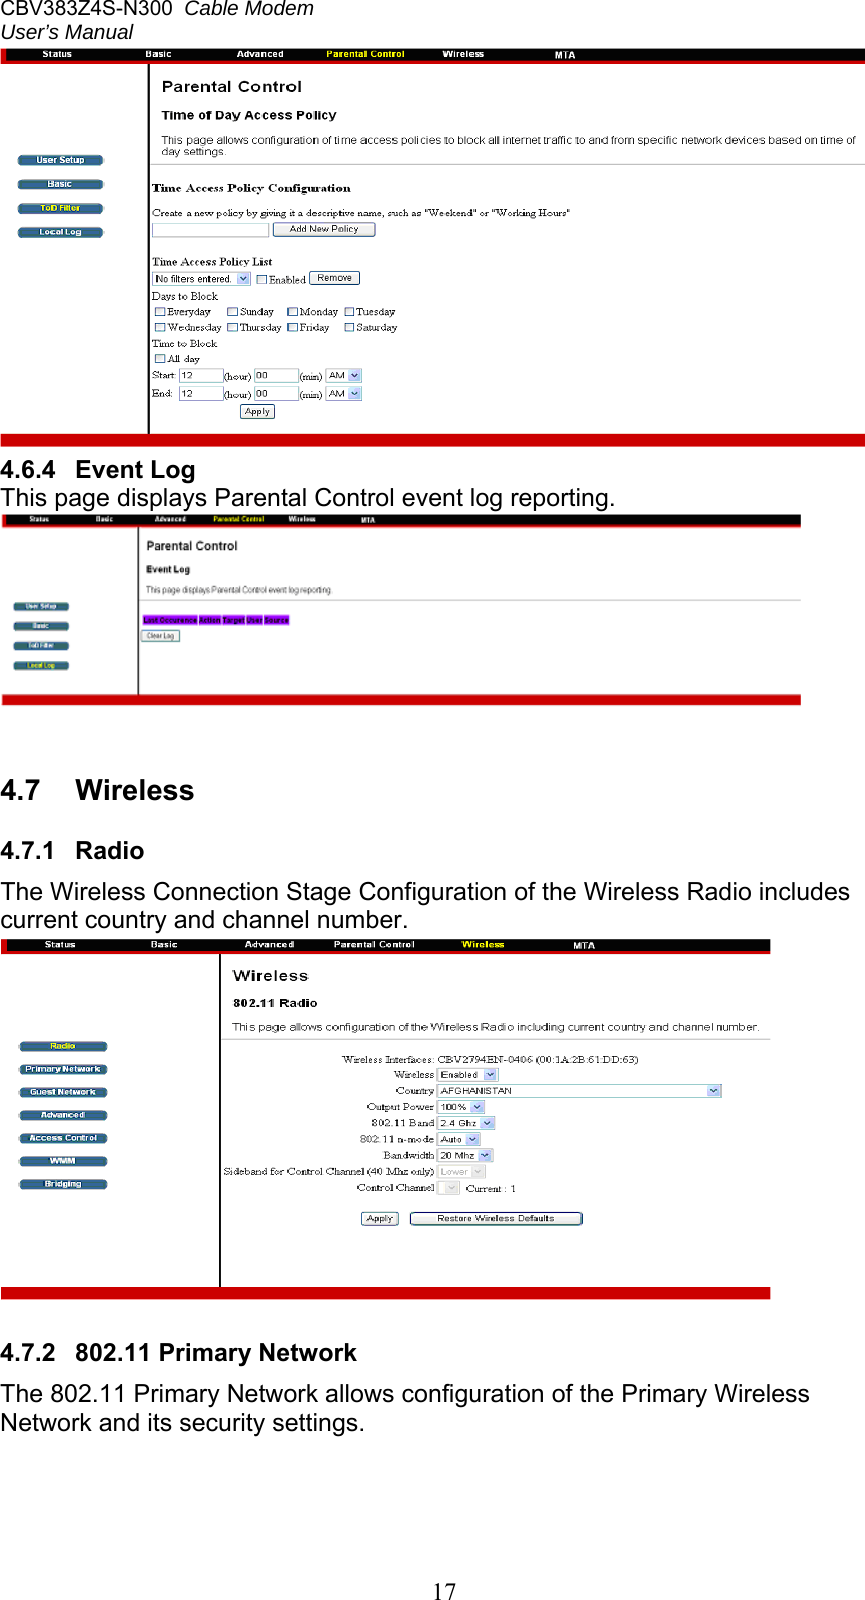 CBV383Z4S-N300  Cable Modem  User’s Manual   17 4.6.4   Event Log  This page displays Parental Control event log reporting.   4.7  Wireless  4.7.1  Radio  The Wireless Connection Stage Configuration of the Wireless Radio includes current country and channel number.   4.7.2  802.11 Primary Network  The 802.11 Primary Network allows configuration of the Primary Wireless Network and its security settings.  